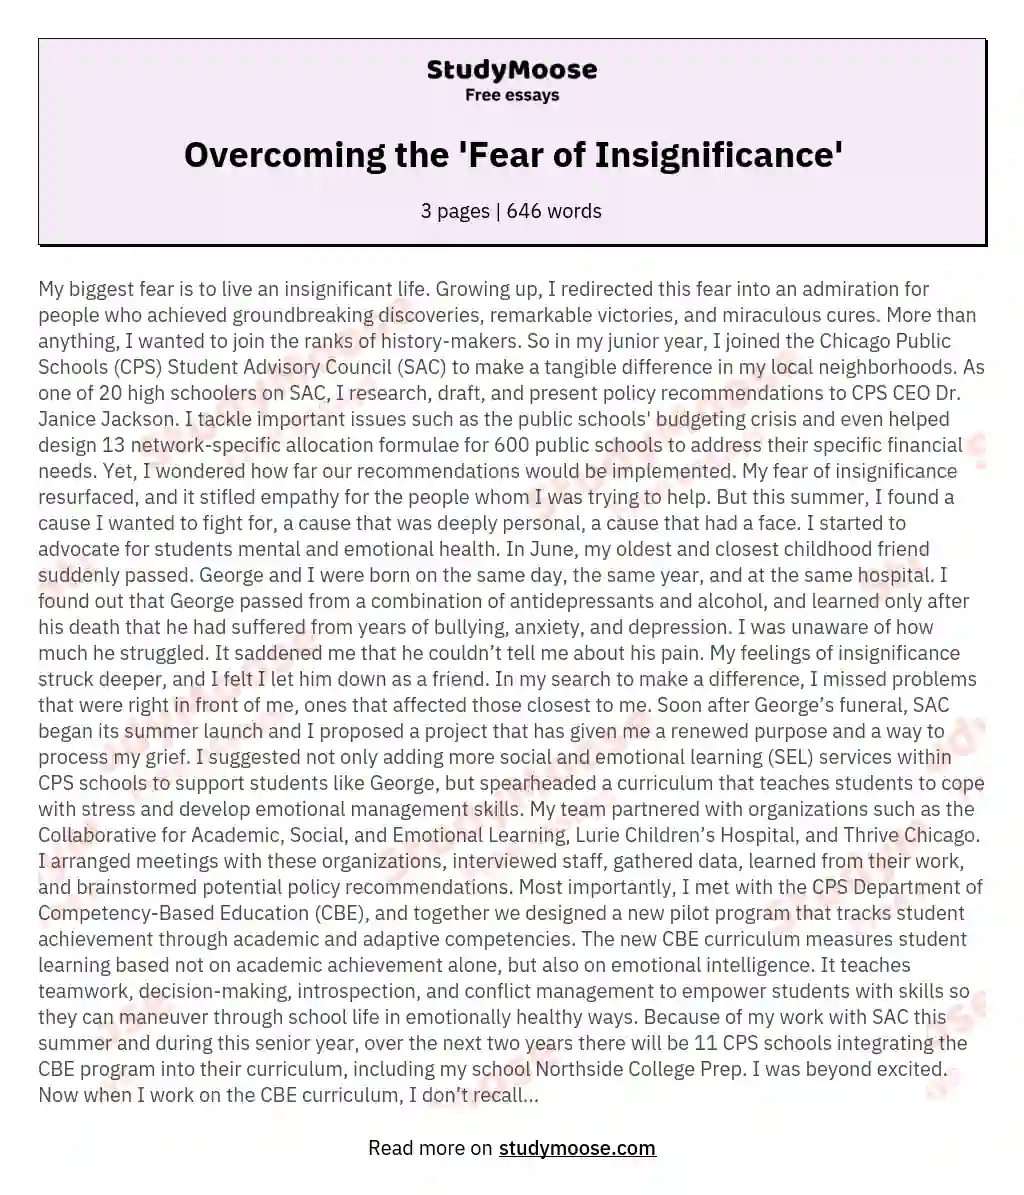 Overcoming the 'Fear of Insignificance'